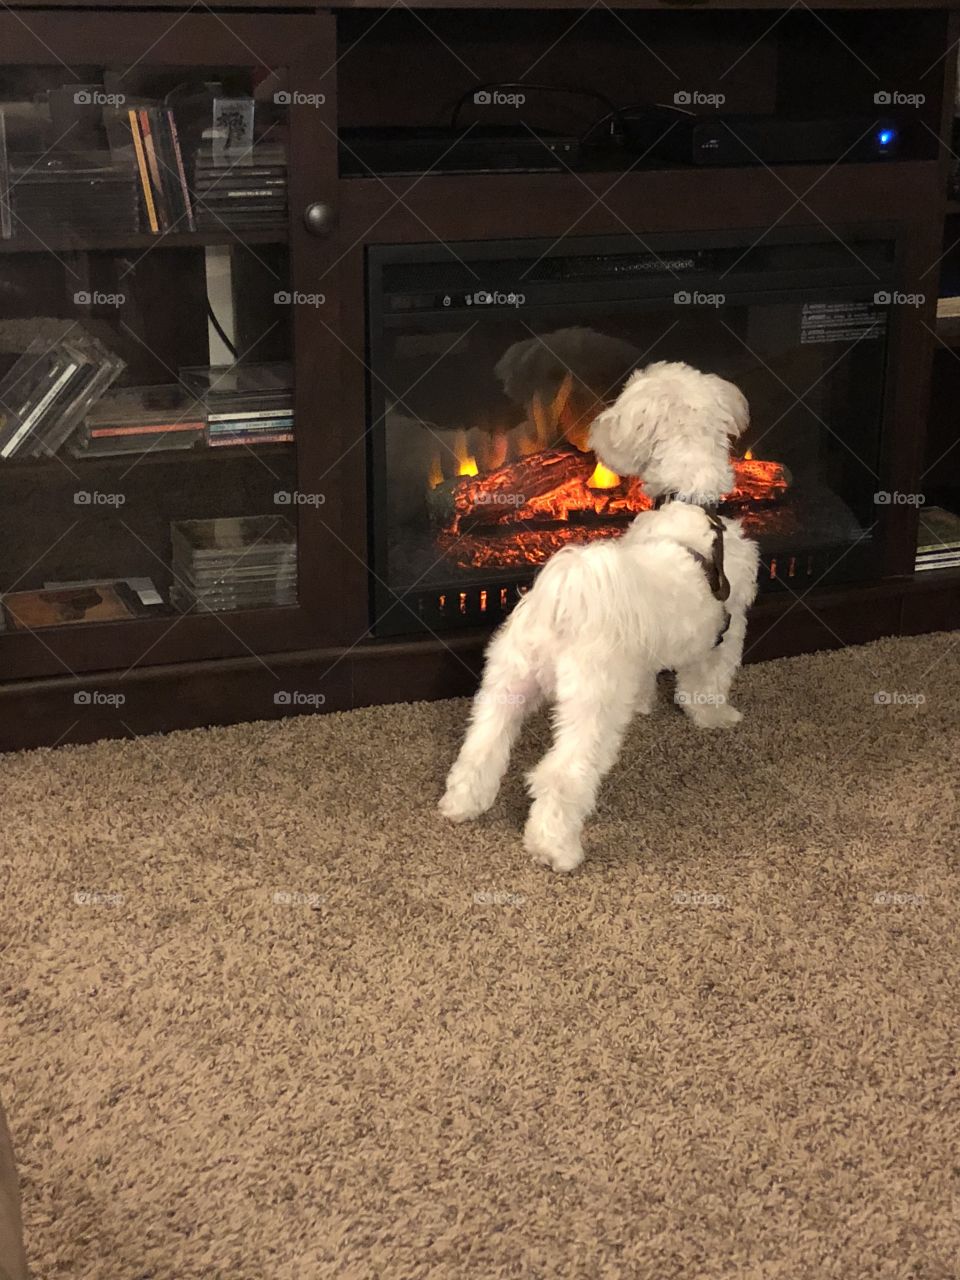 Amazed dog looking at the fireplace. Stay cozy in winter ❄️